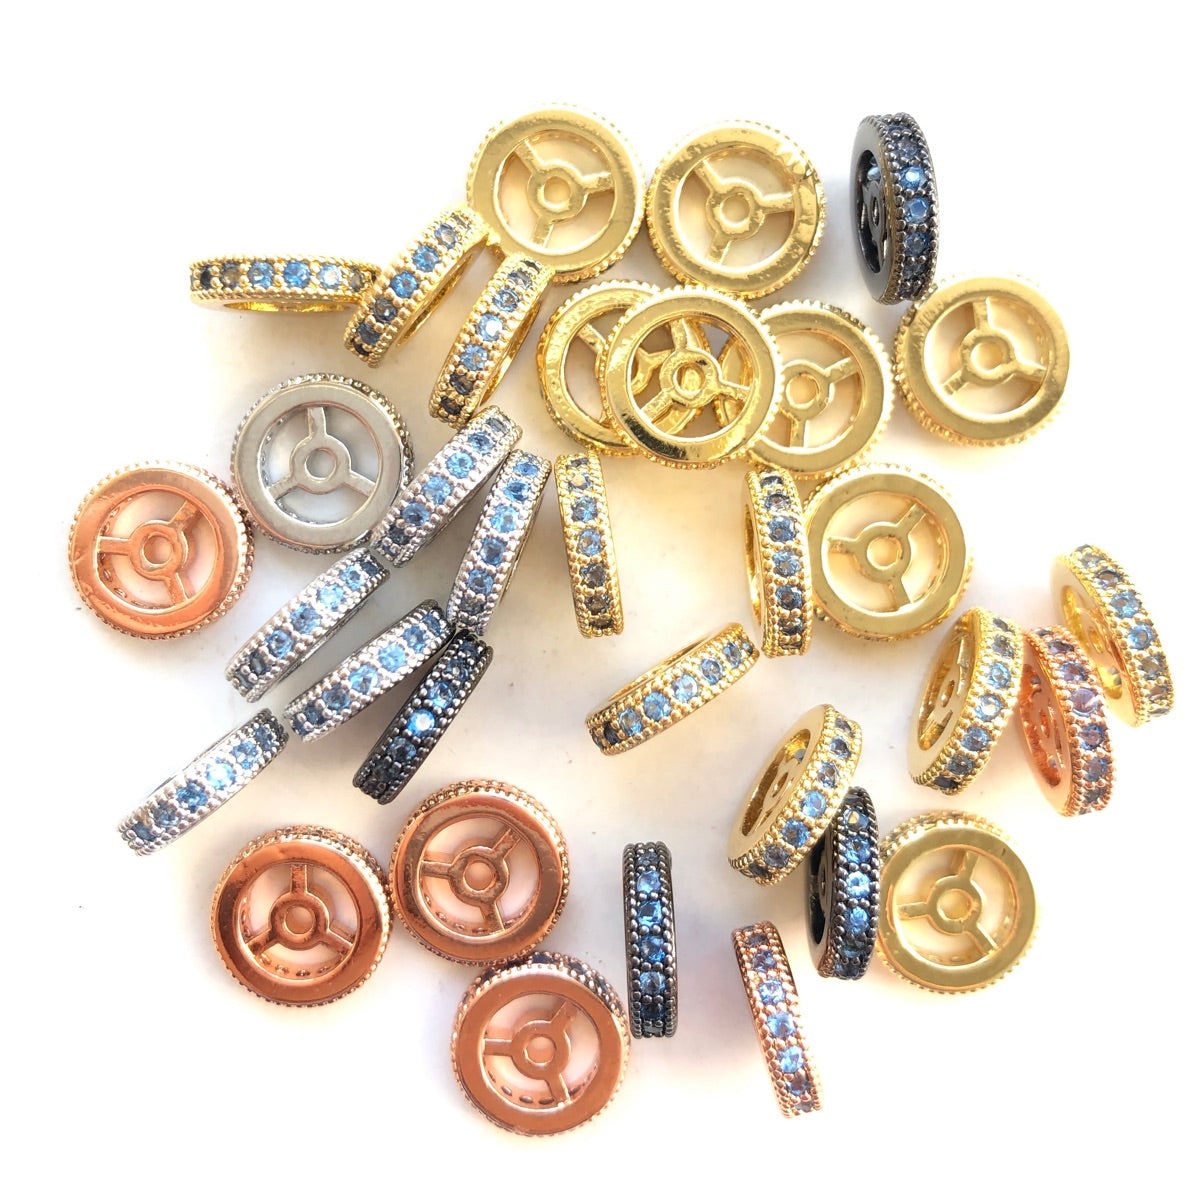 20pcs/lot 9.6/12mm Lake Blue CZ Paved Wheel Rondelle Spacers Mix Colors CZ Paved Spacers New Spacers Arrivals Rondelle Beads Charms Beads Beyond